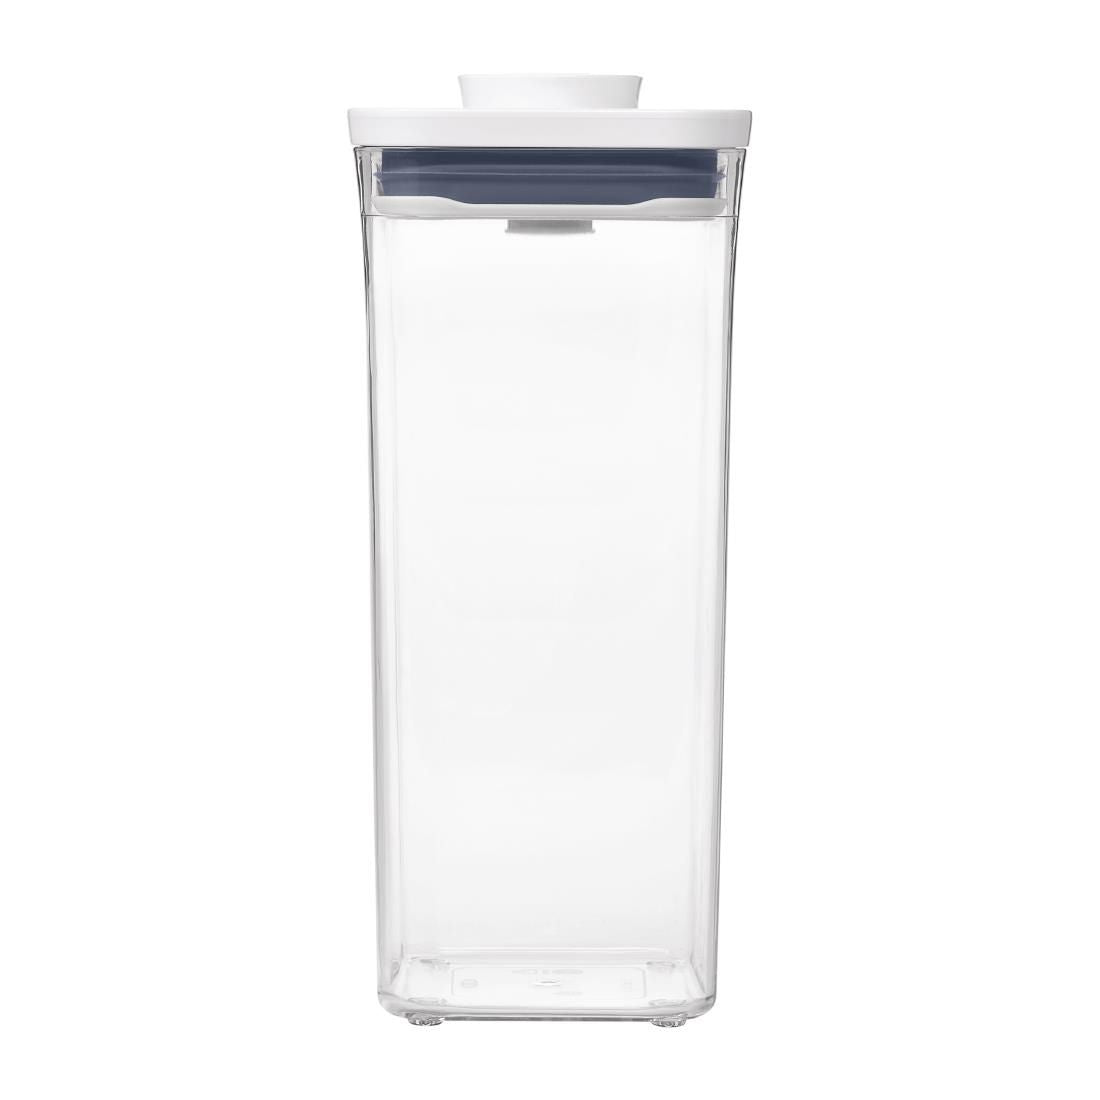 FB092 Oxo Good Grips POP Container Square Small Medium JD Catering Equipment Solutions Ltd